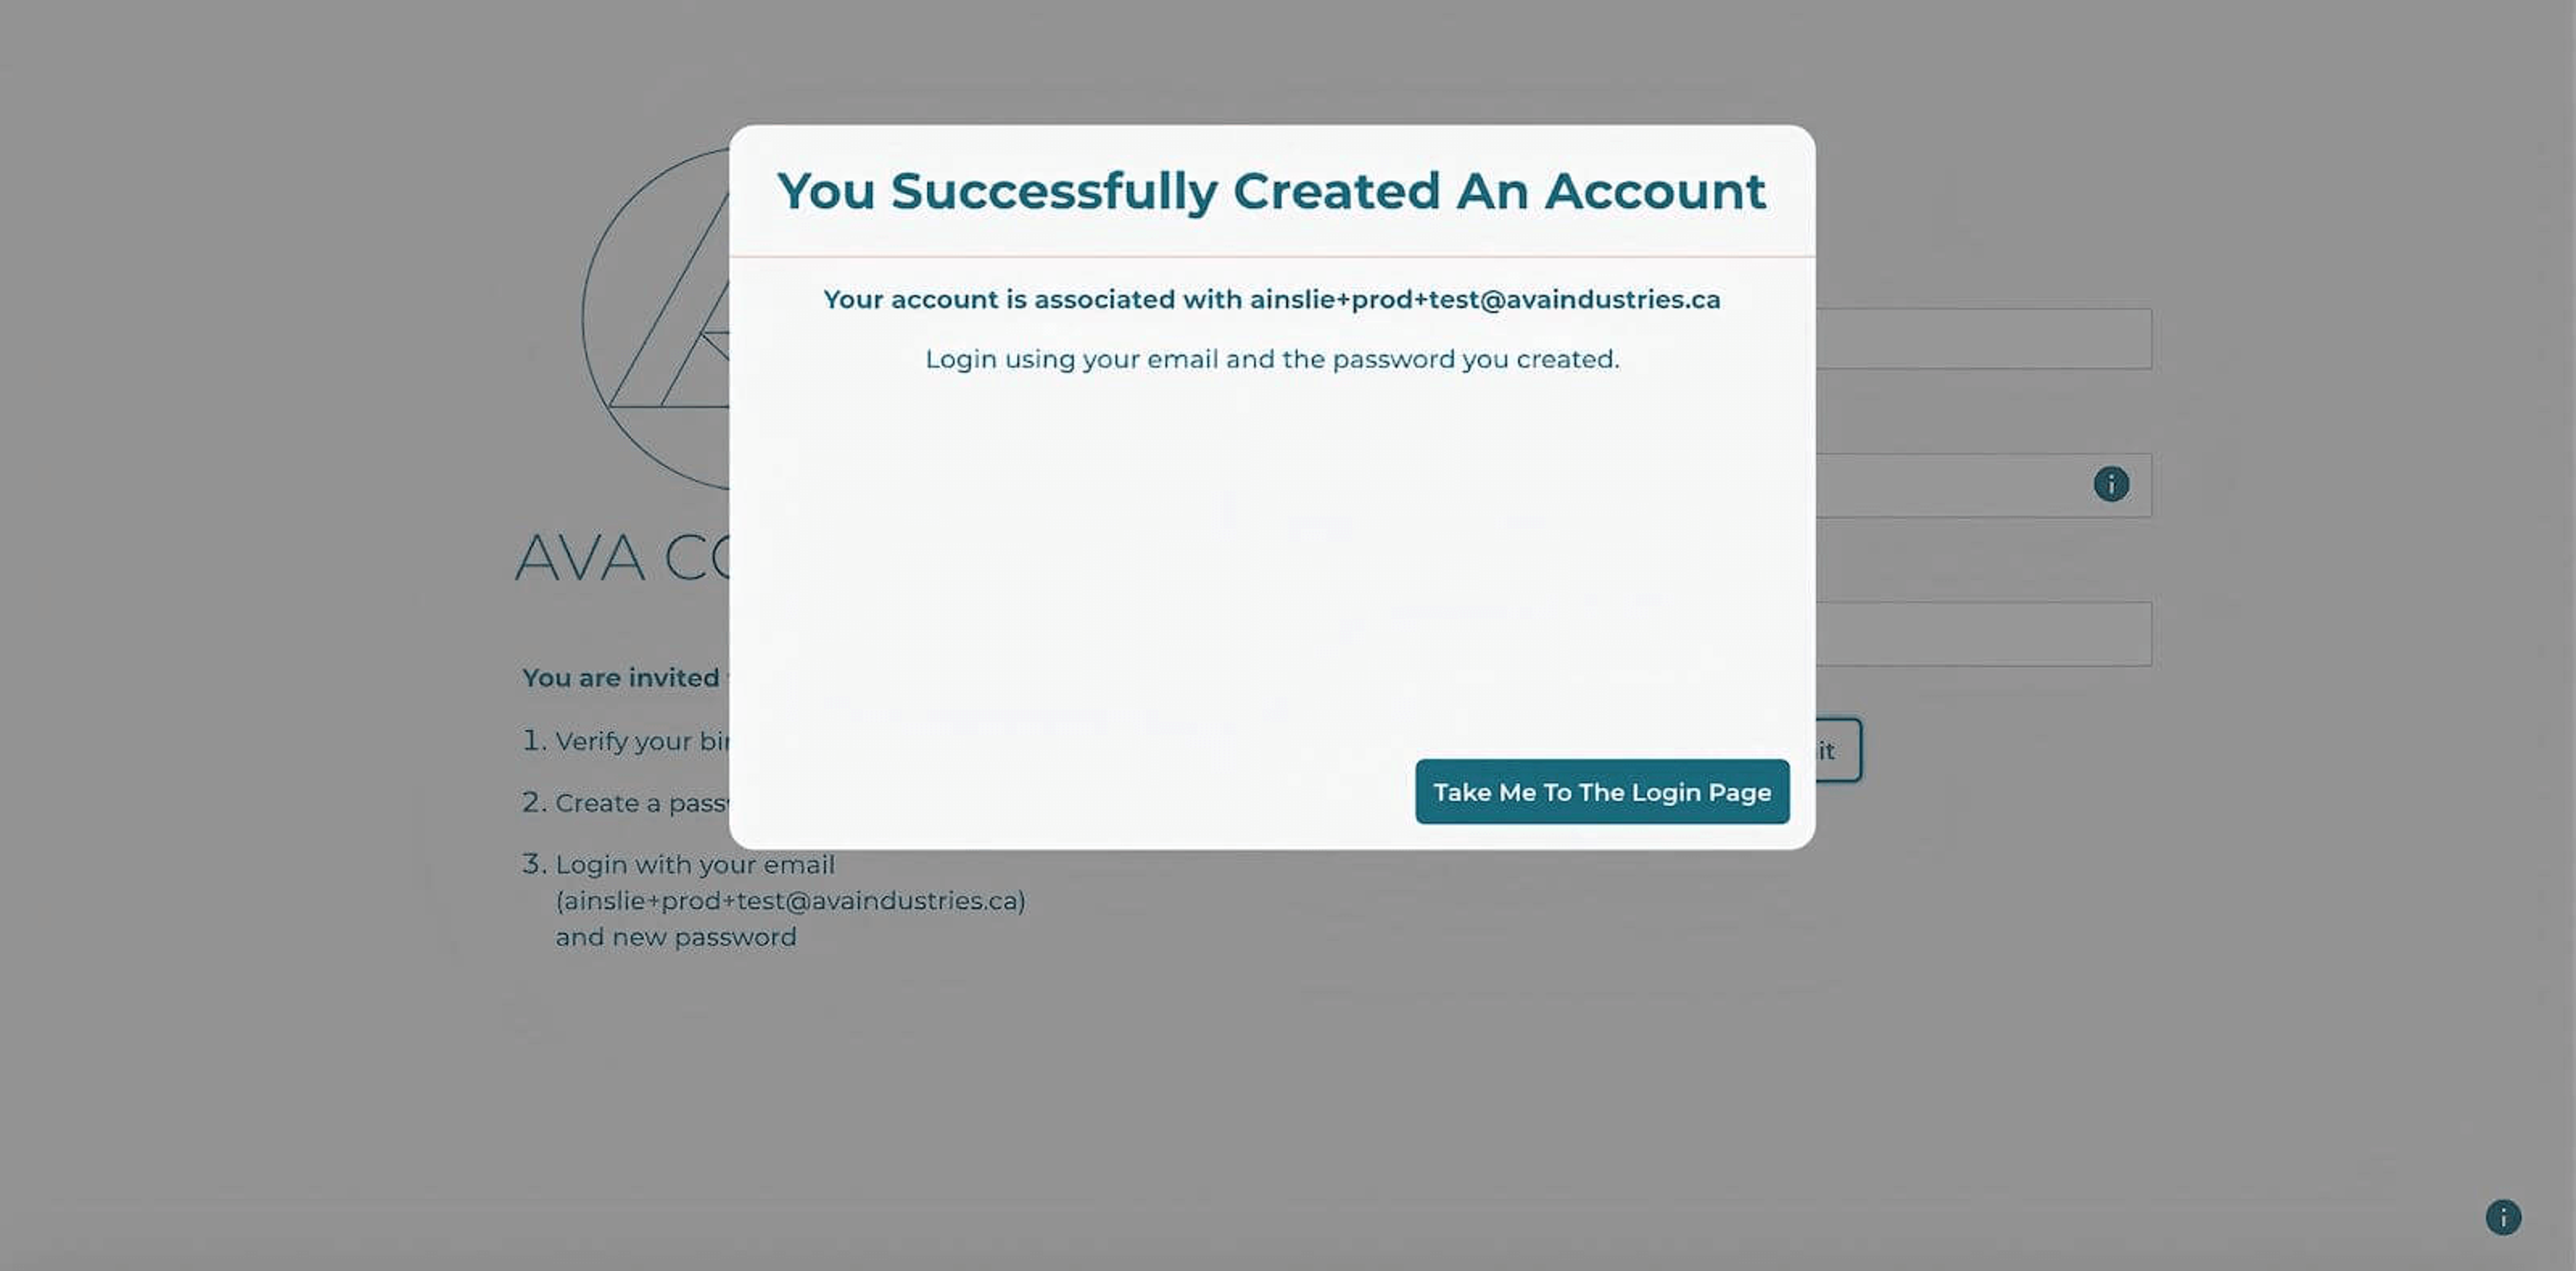 A screenshot of the 'successful account creation' state on AVA Connect